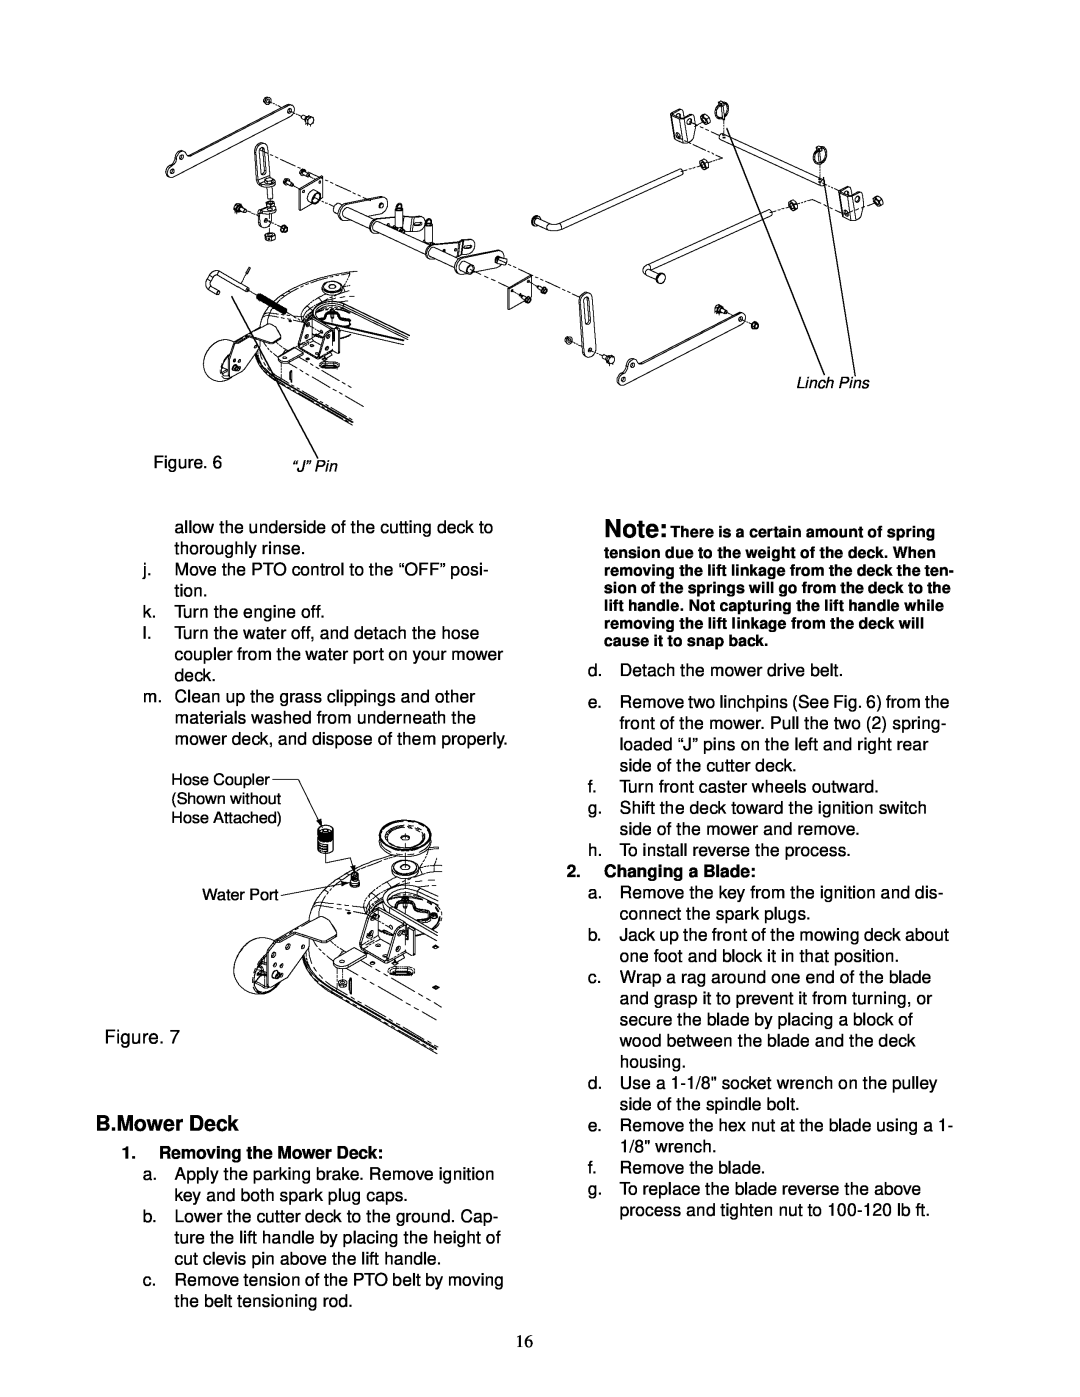 Cub Cadet 23HP Z-Force 50 service manual B.Mower Deck, Removing the Mower Deck, Changing a Blade 